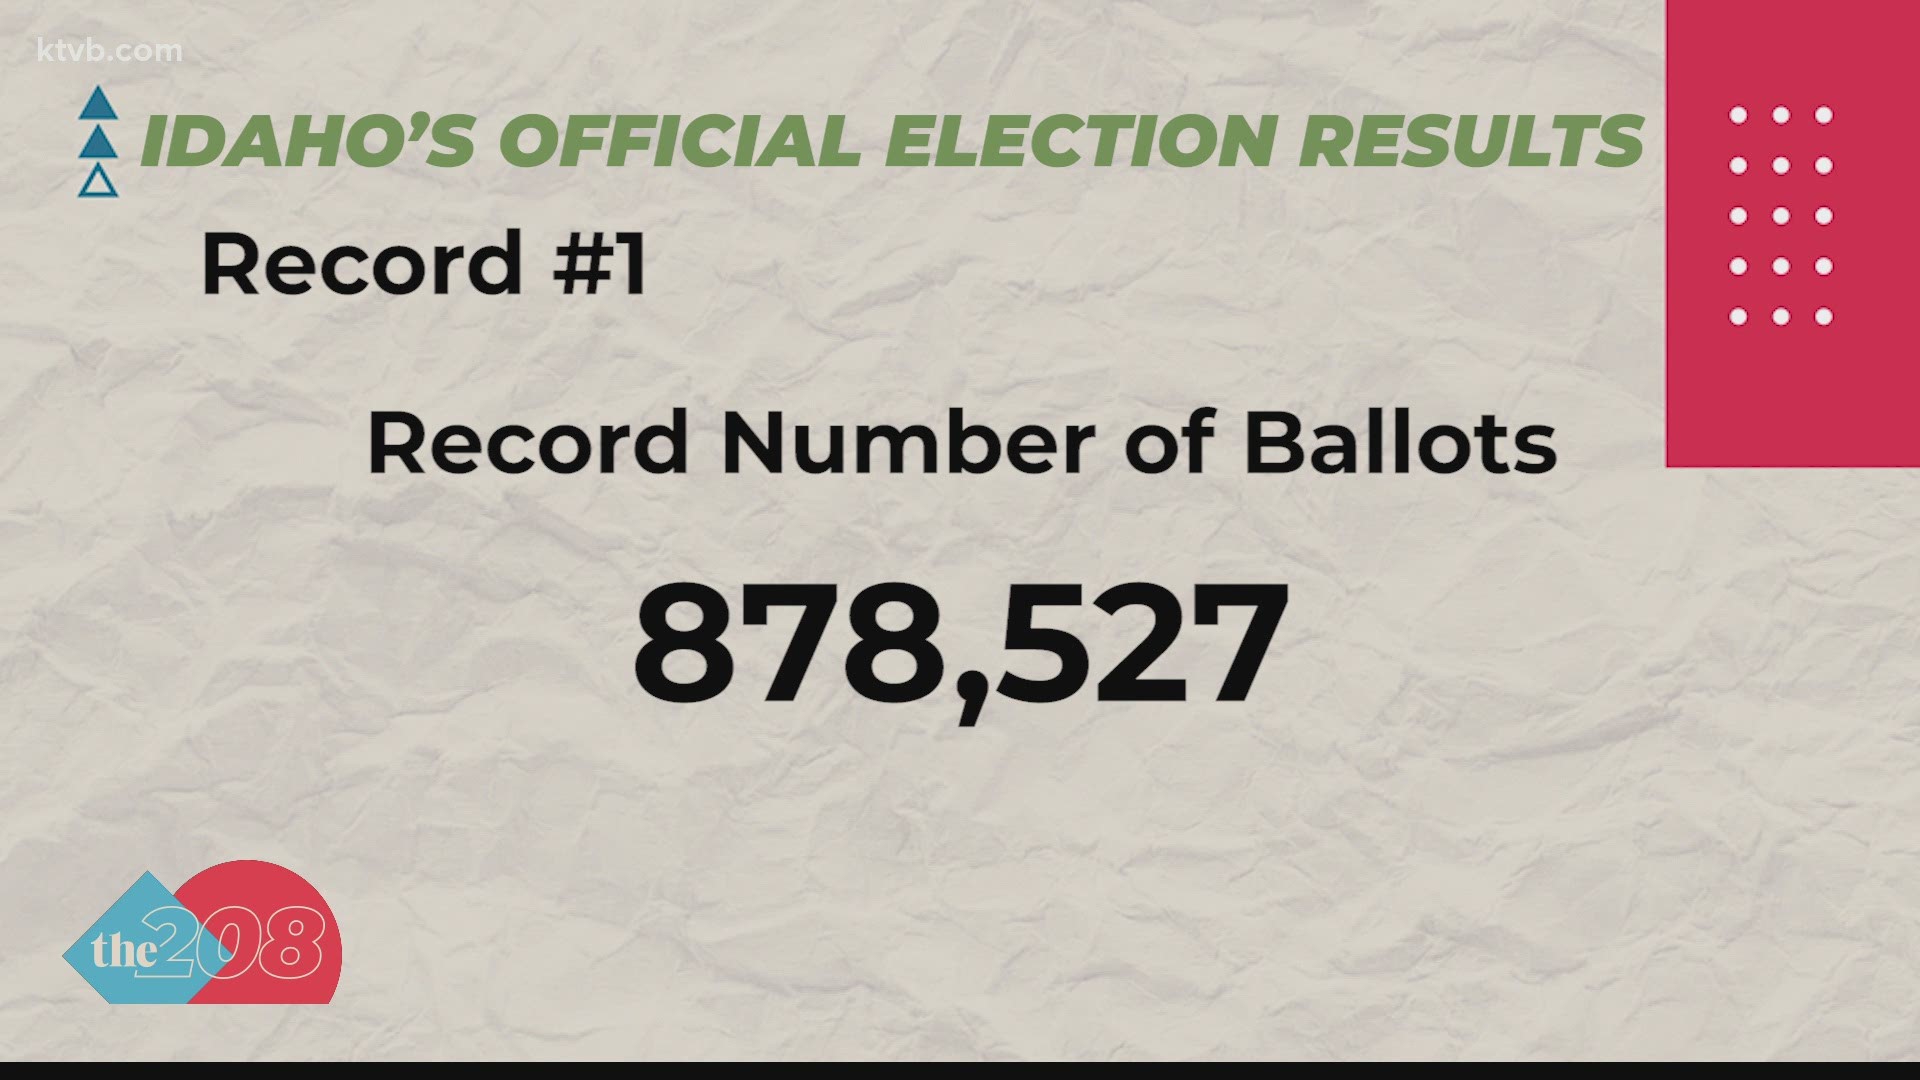 A record-breaking 878,527 ballots were cast in Idaho for the 2020 General Election, which is a turnout of 81.2% of Idaho's 1,082,417 registered voters